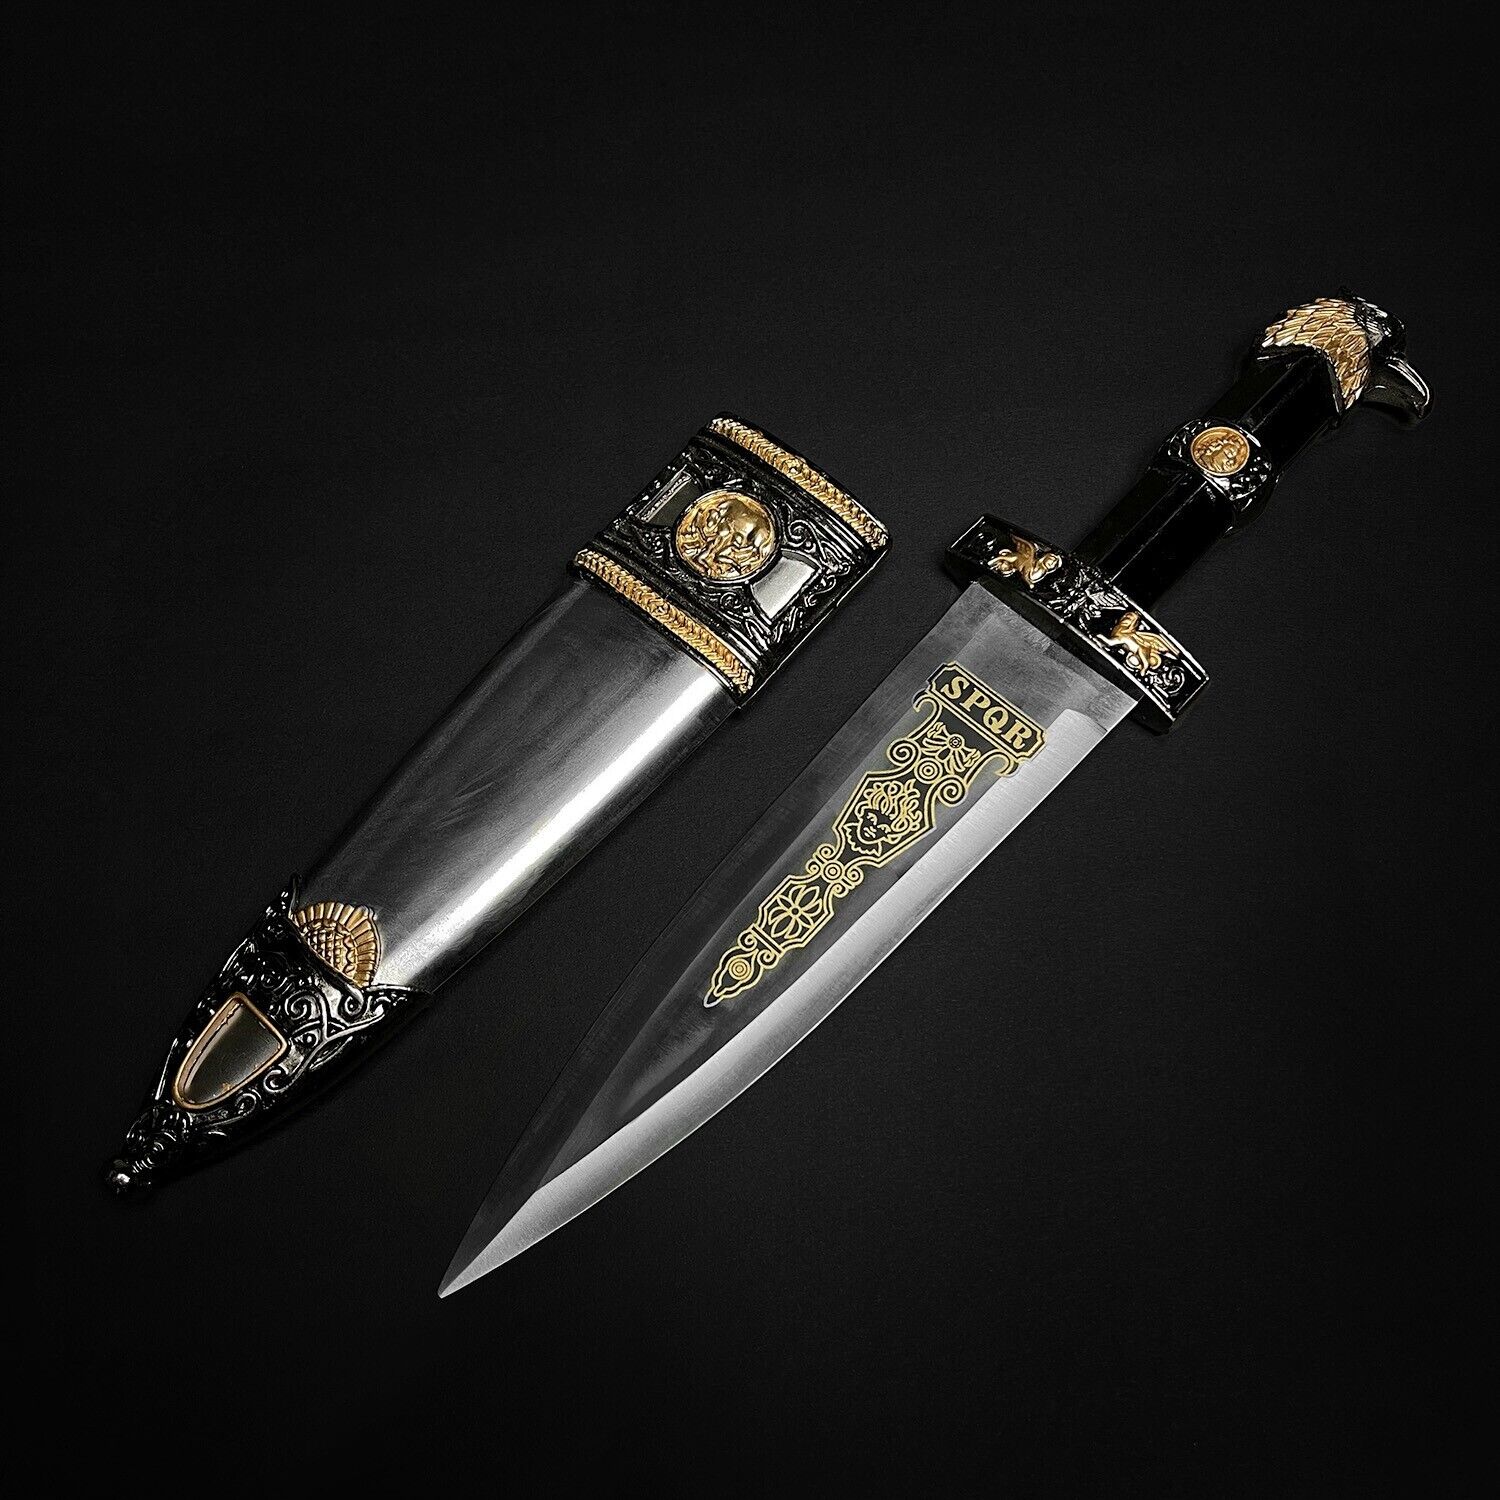 PS Stainless Steel Blade Roman Daggers with Aluminum Scabbard (Eagle Aquila)